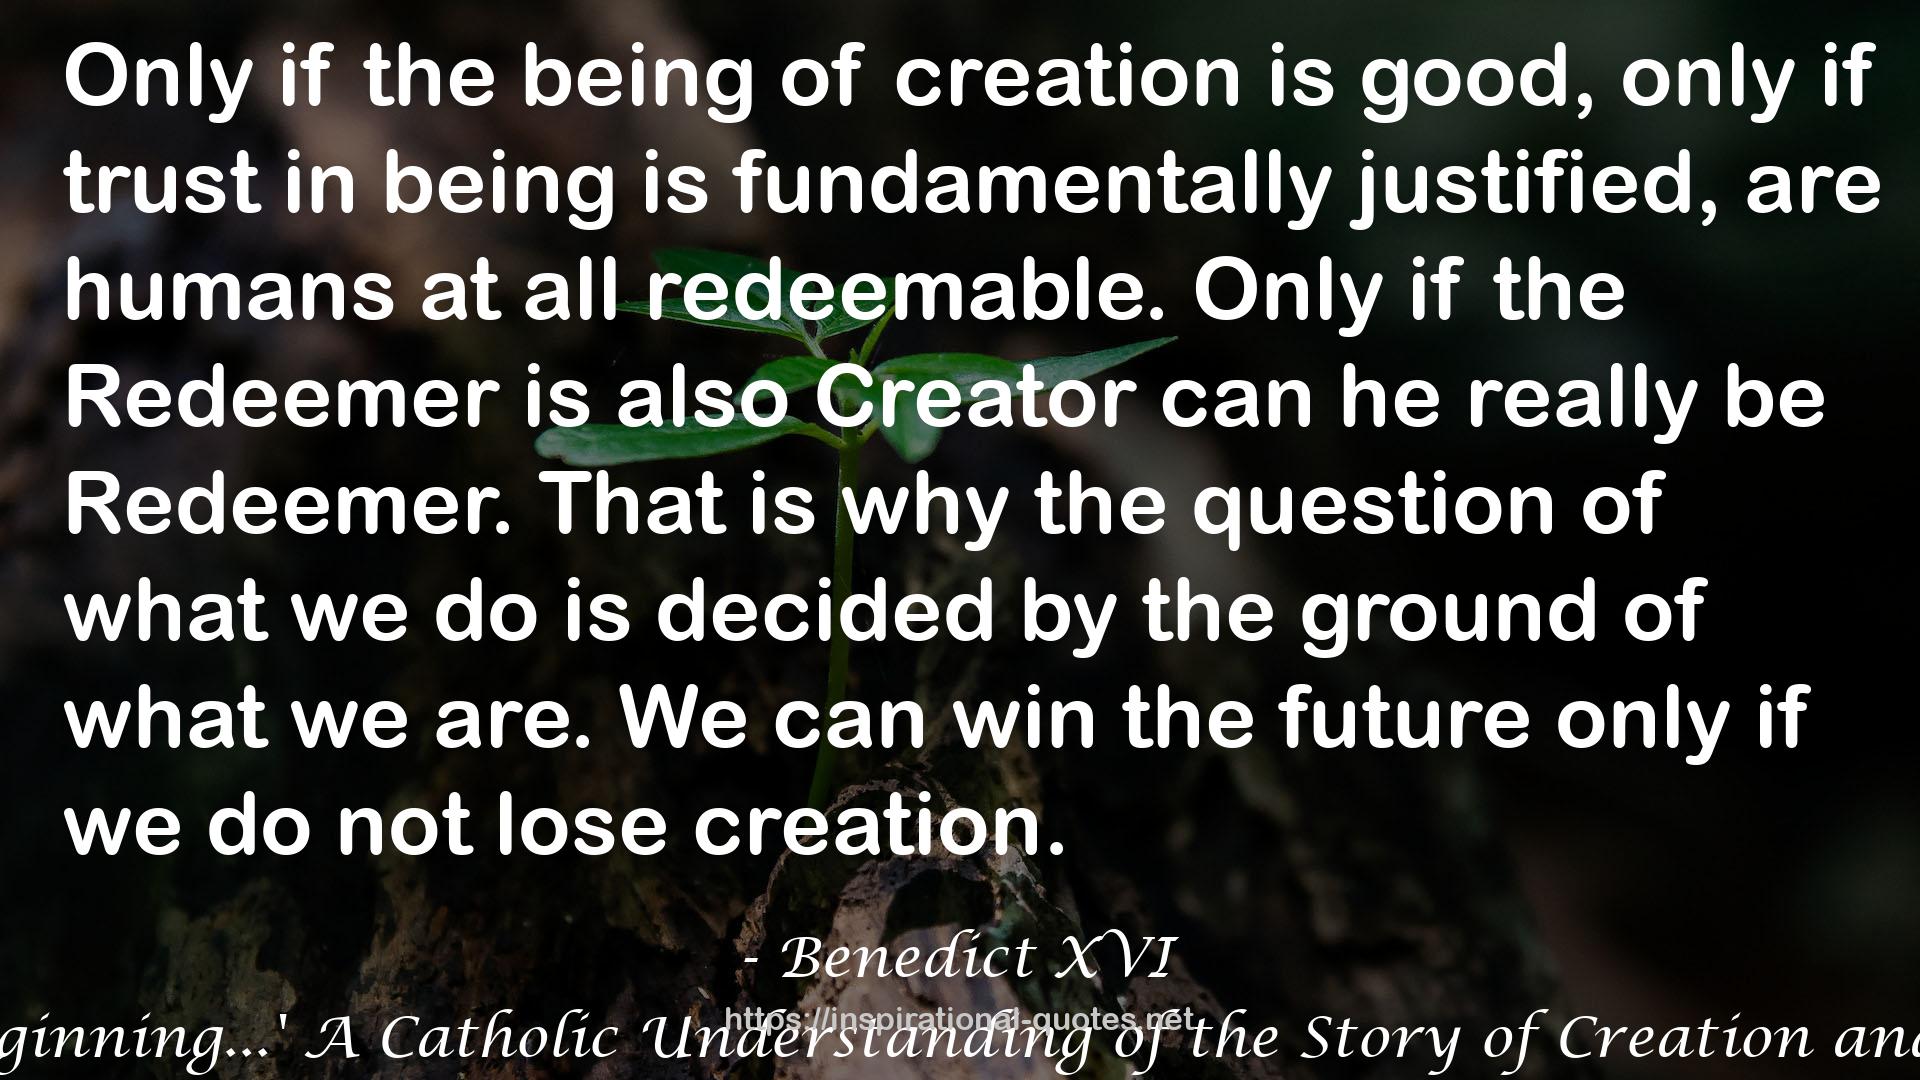 'In the Beginning...' A Catholic Understanding of the Story of Creation and the Fall QUOTES